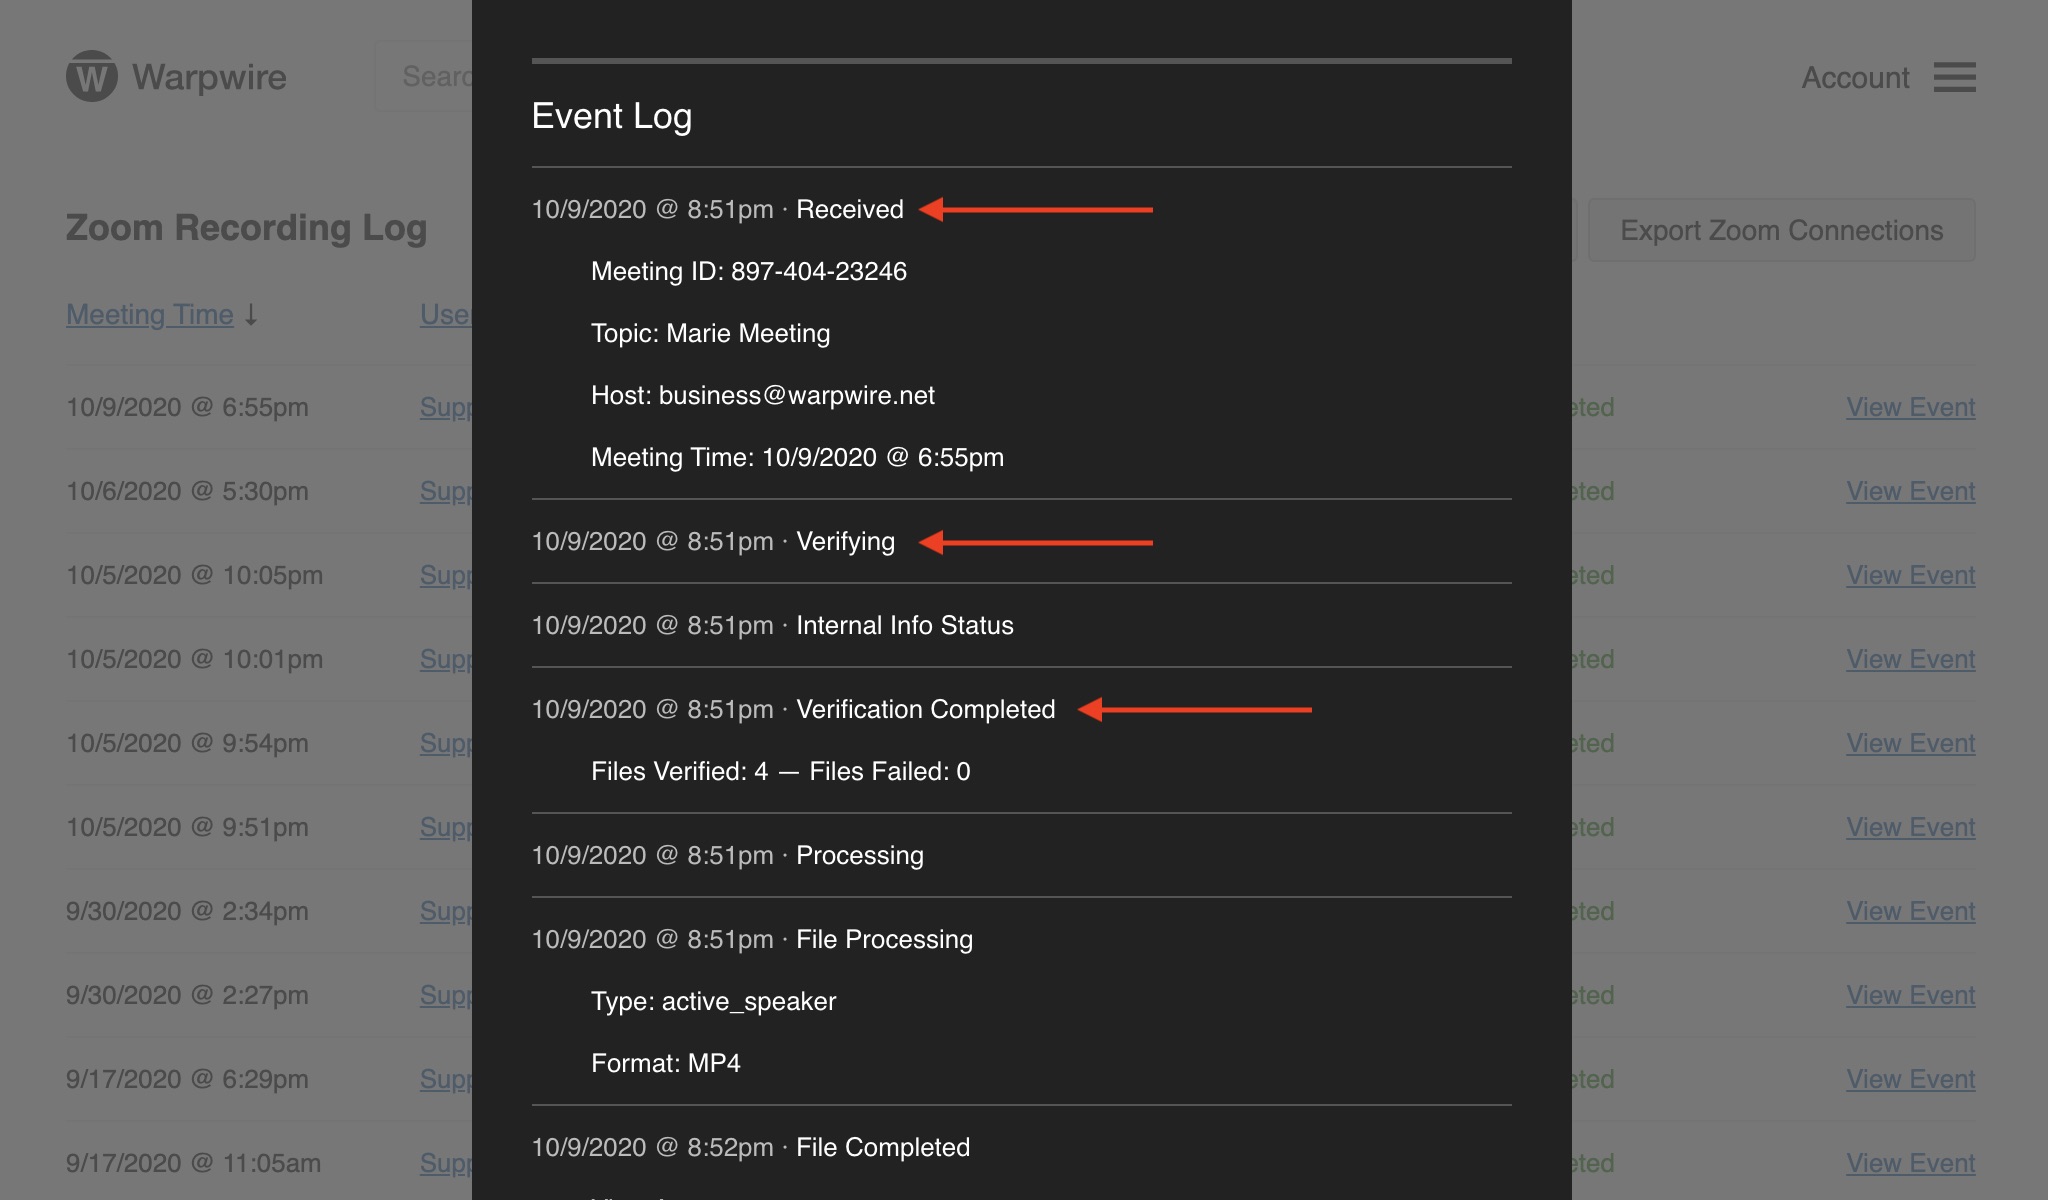 List of Zoom event statuses within the 'Event Log'